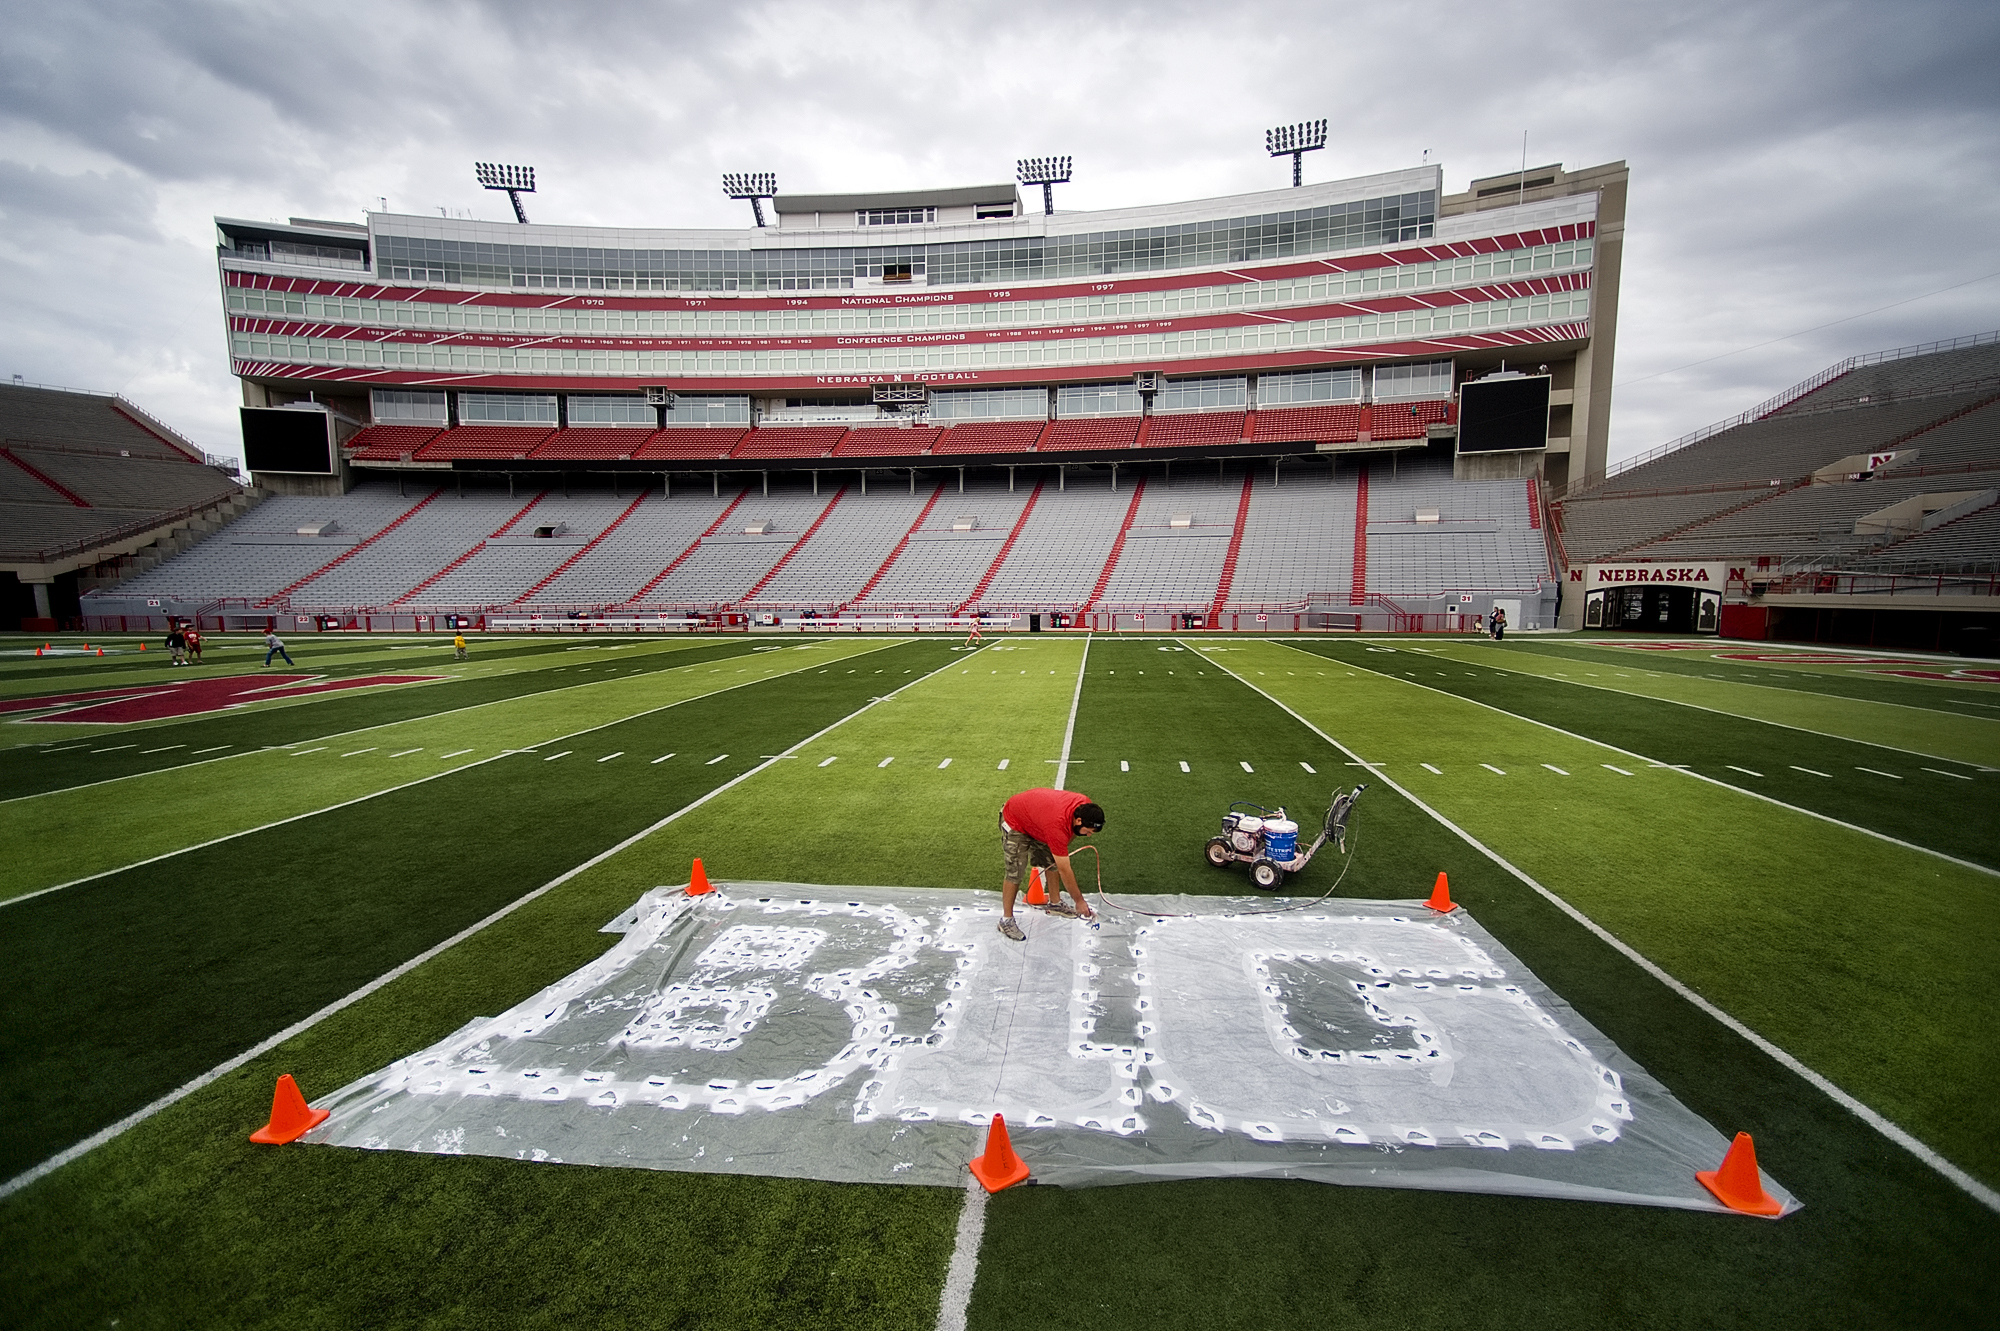 PHOTO: Turf manager Jared Hertzel touches up the newly-painted Big Ten conference logo on the football field at Memorial Stadium in Lincoln, Neb., Oct. 6, 2011.